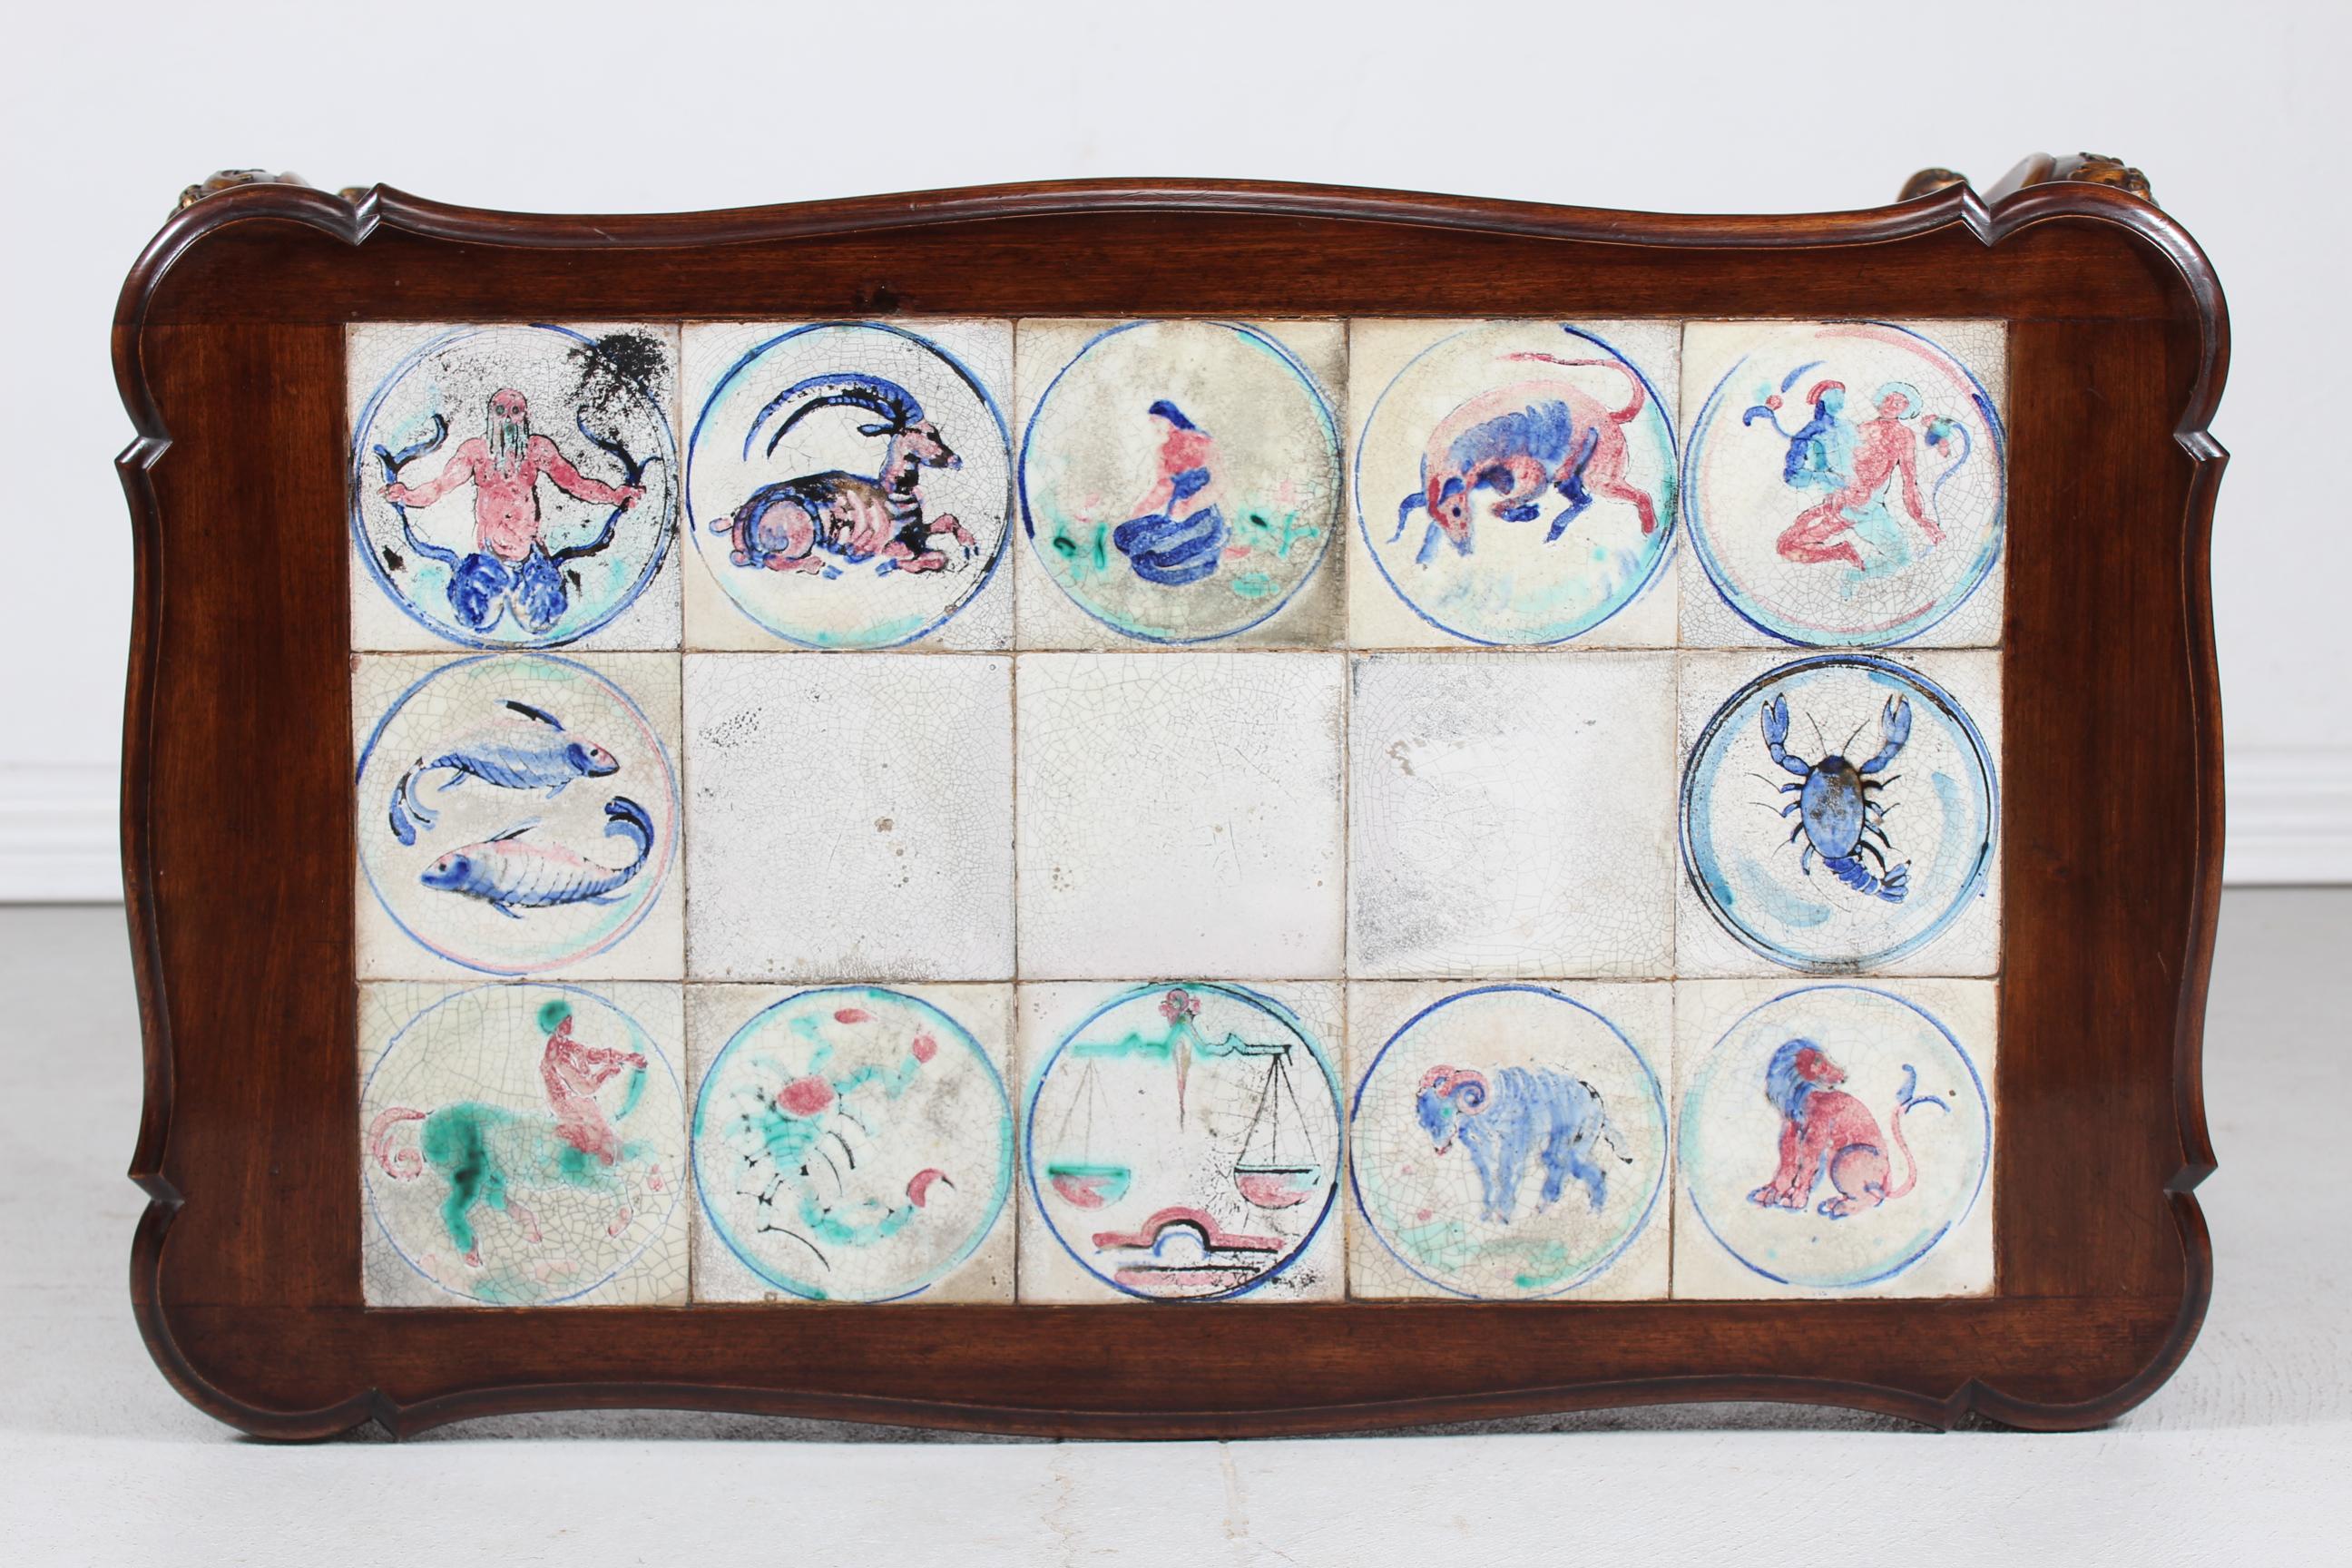 Kähler Rococo Style Table with Zodiac Signs Tiles by Jens Thirslund, 1930s In Good Condition For Sale In Aarhus C, DK